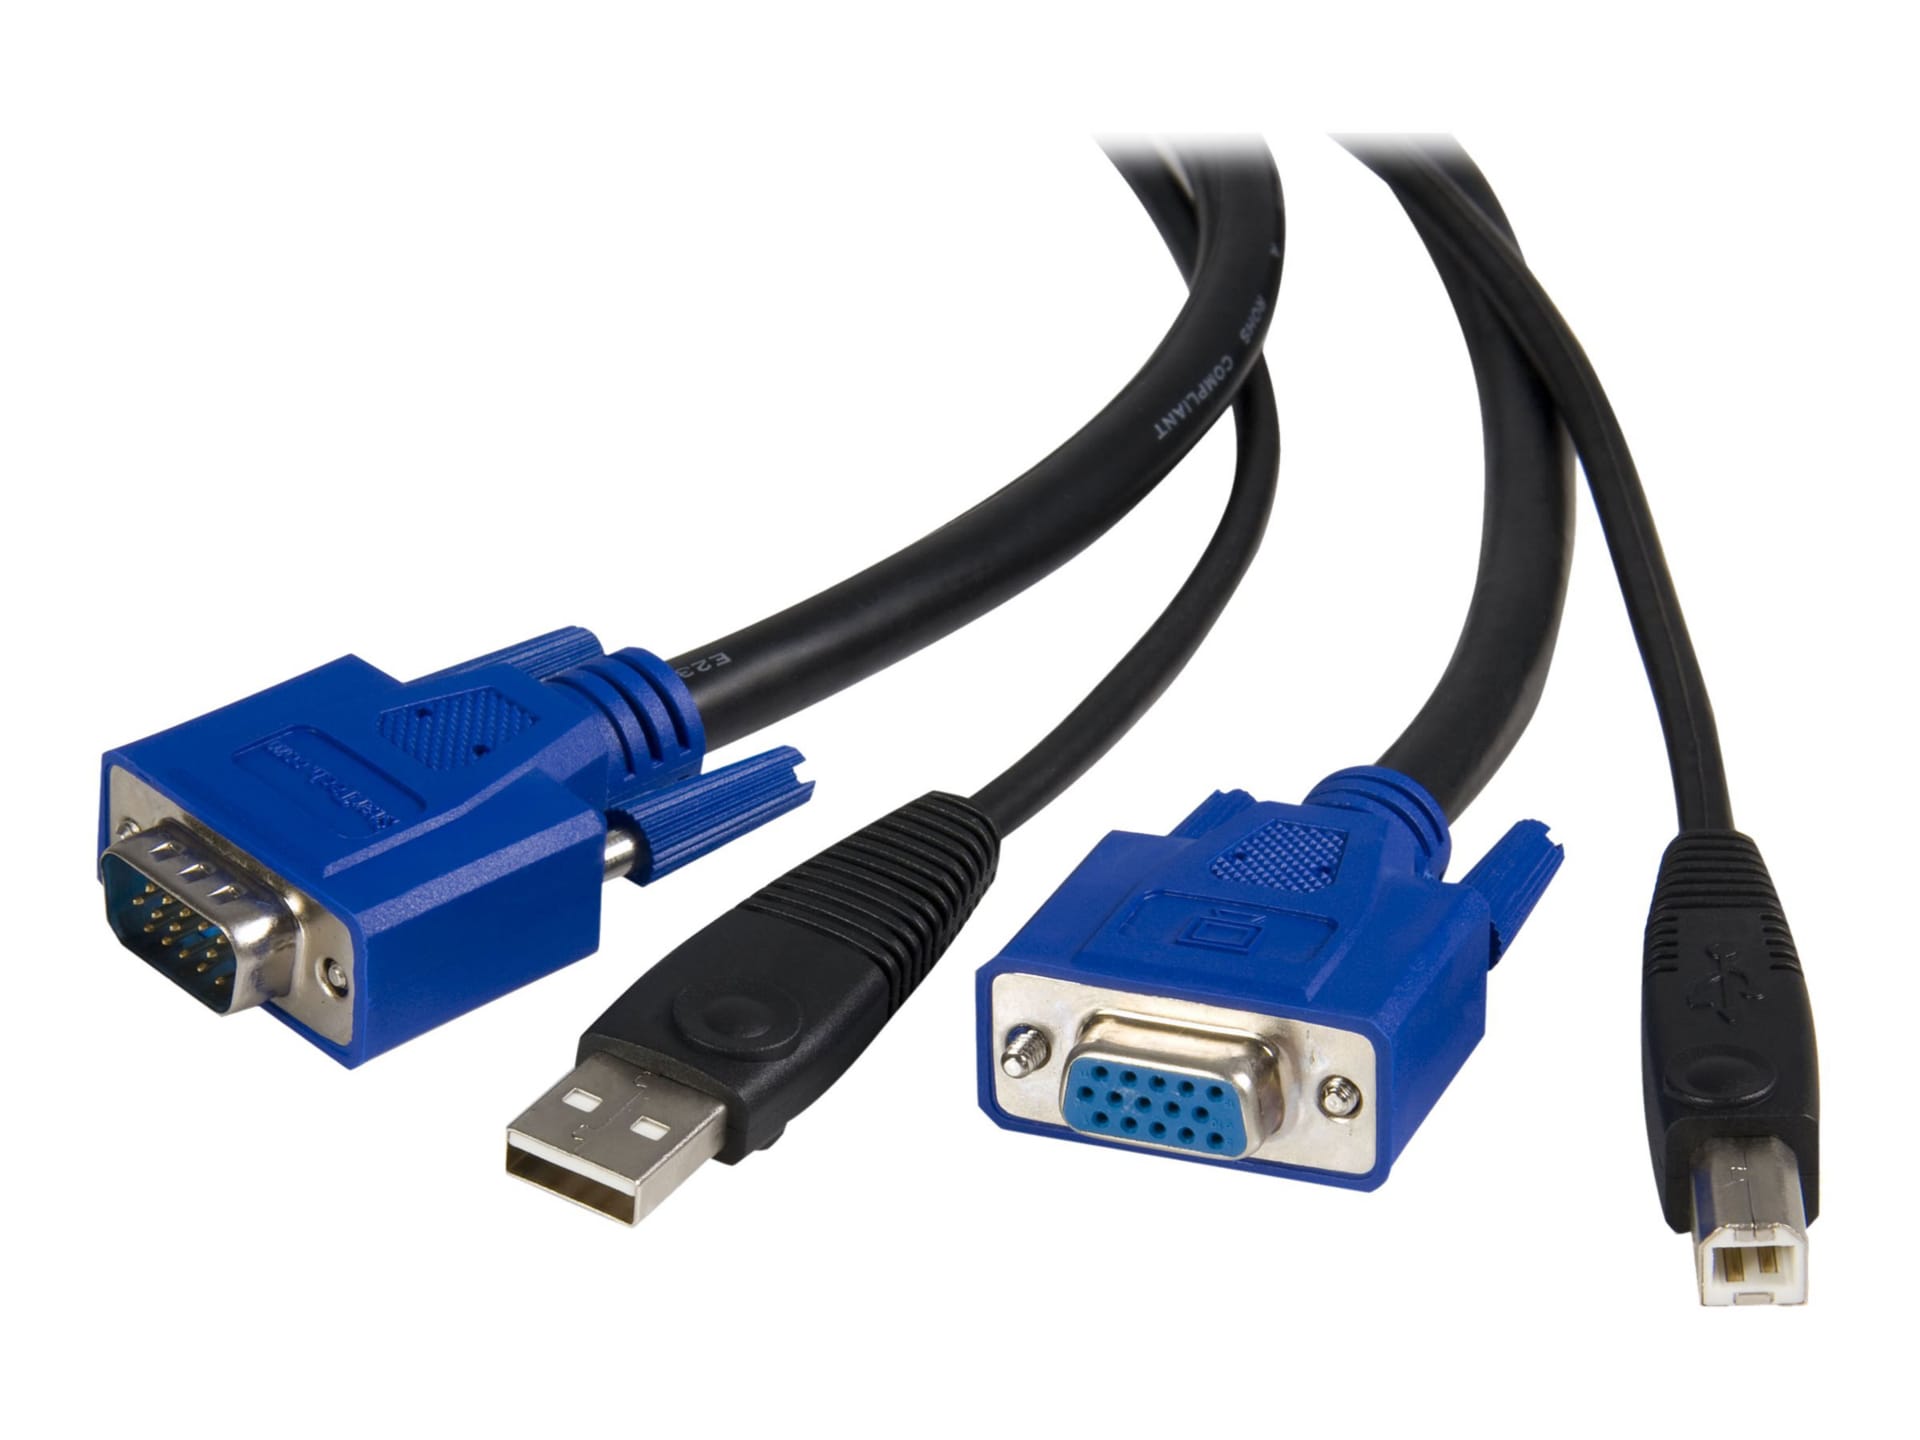 StarTech.com 10 ft 2-in-1 Universal USB KVM Cable - Video / USB cable - HD-15, 4 pin USB Type B (M) - 4 pin USB Type A,